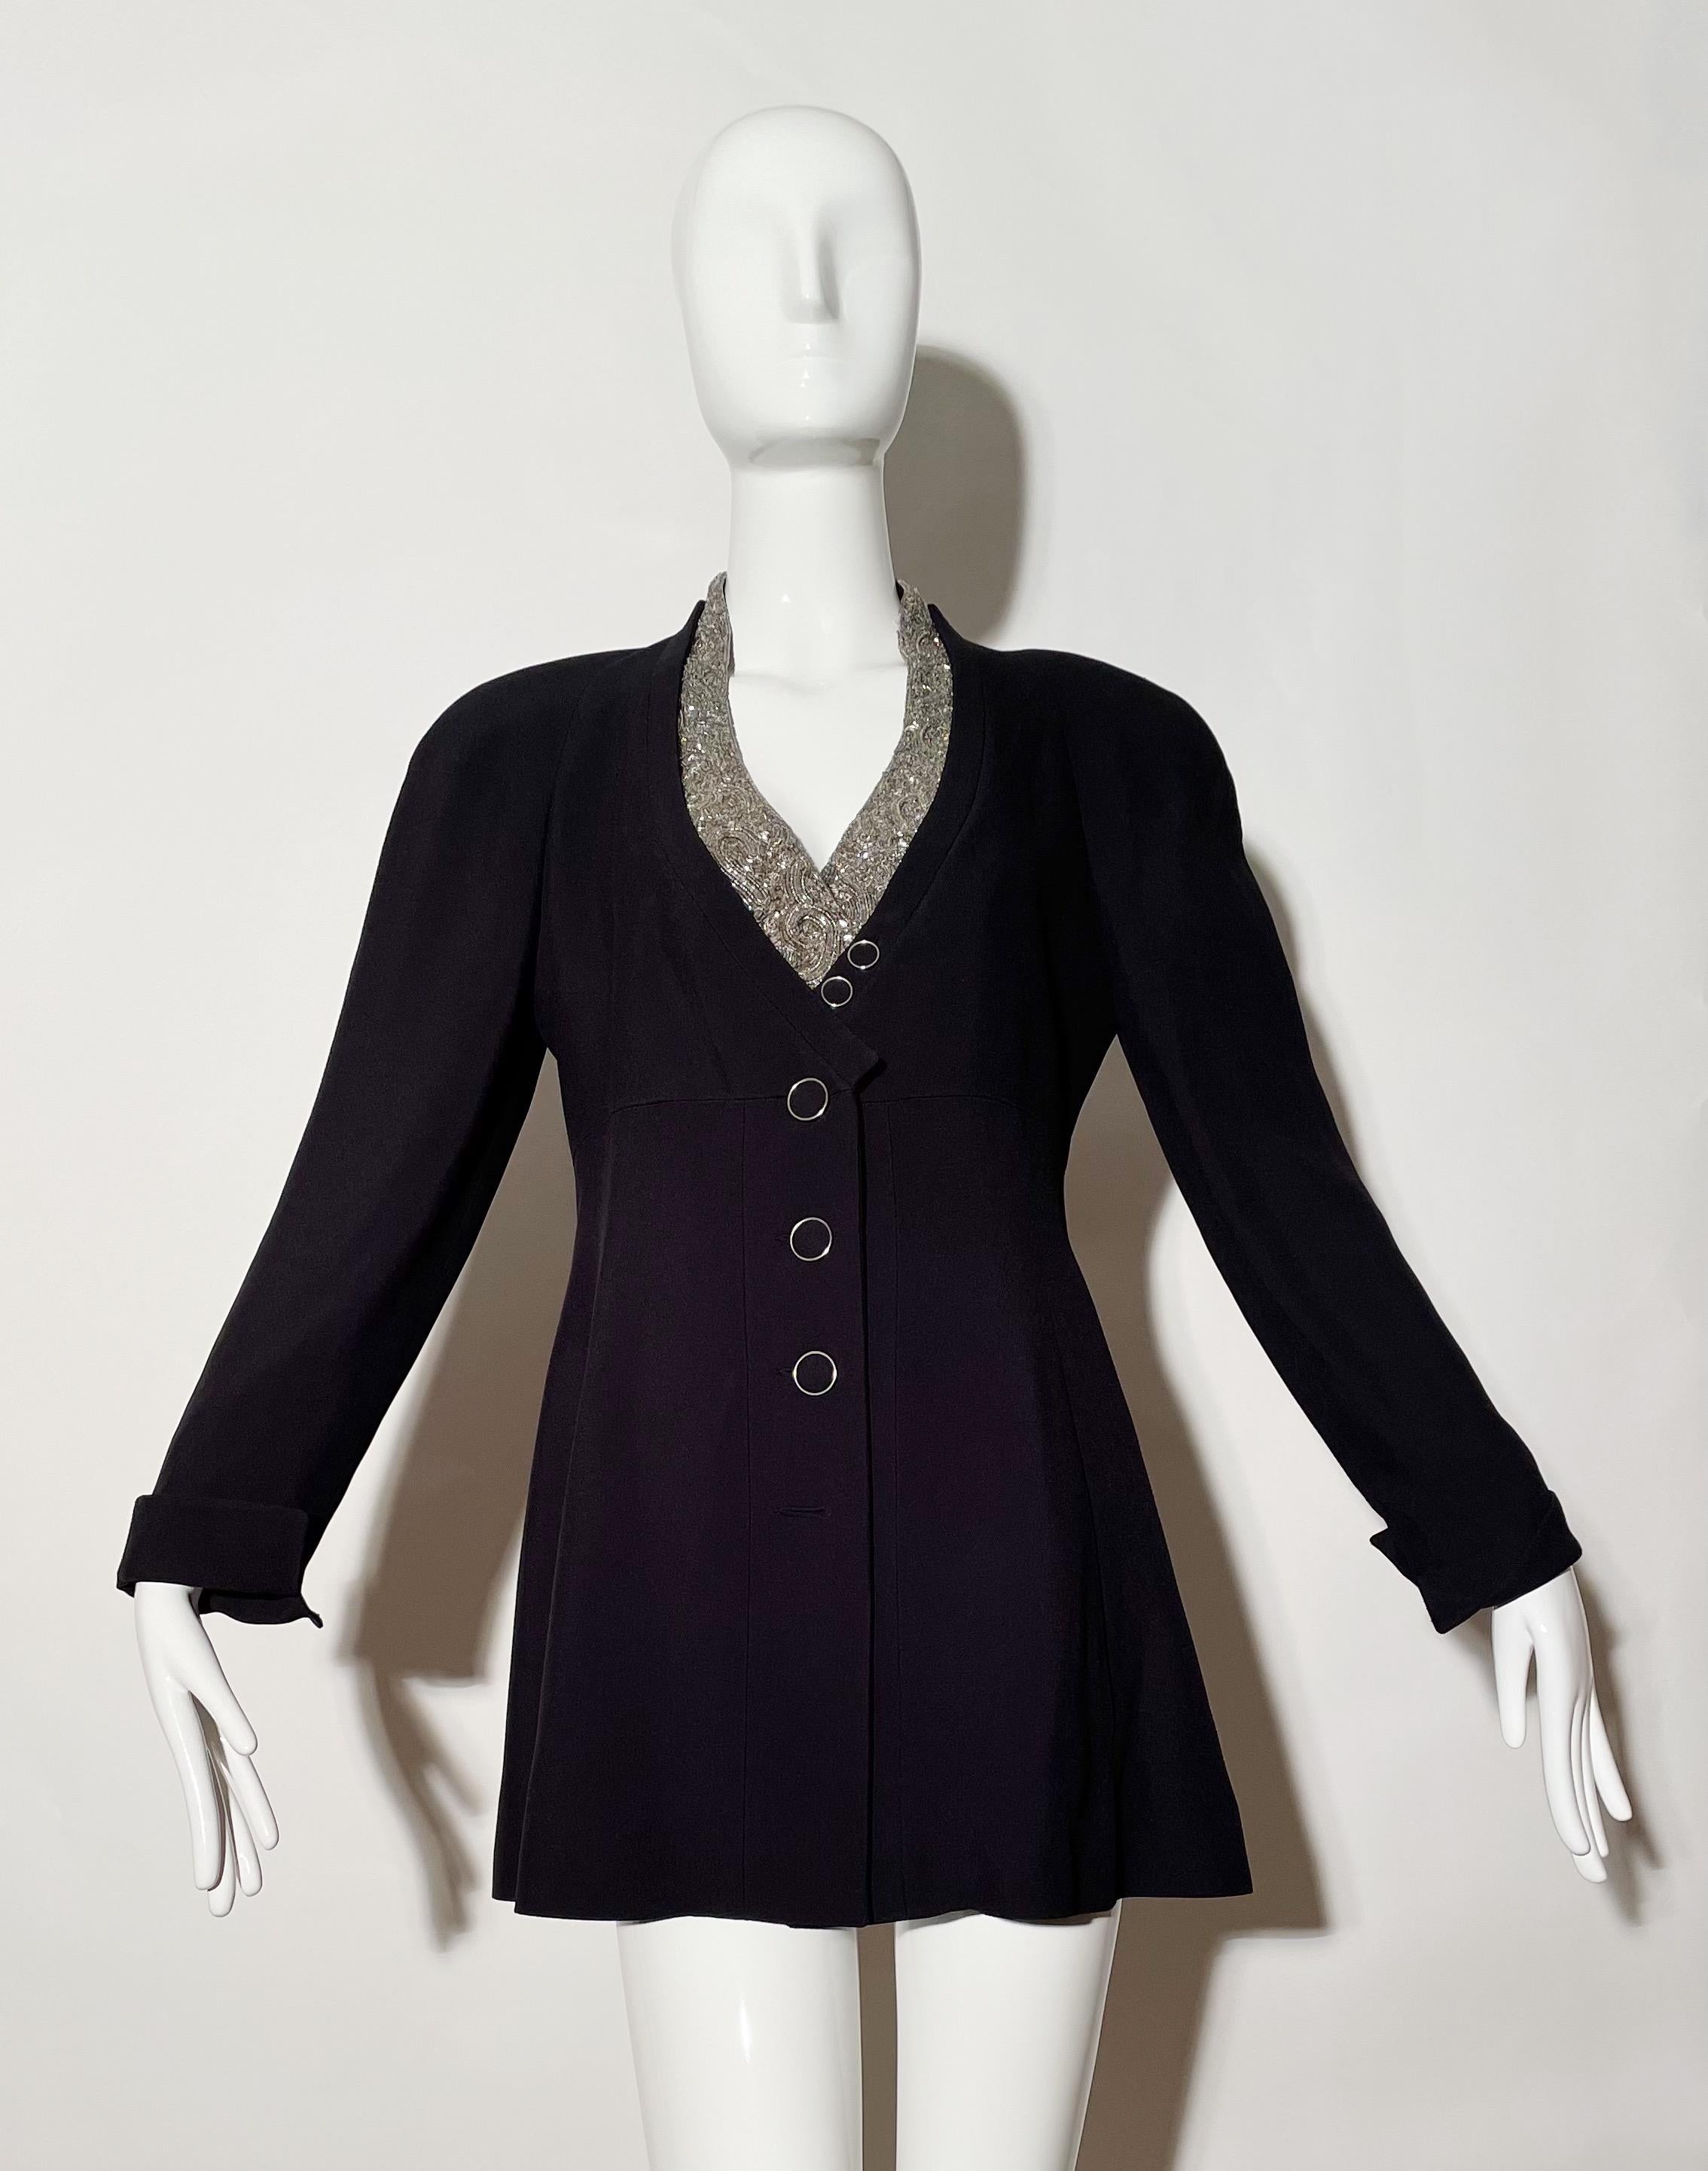 Black blazer with beaded lapel. Front button closures. Pockets. Shoulder pads. Lined. Acetate, viscose blend. Made in France. 
*Condition: Excellent vintage condition. Missing bottom button ( as pictured ) 

Measurements Taken Laying Flat